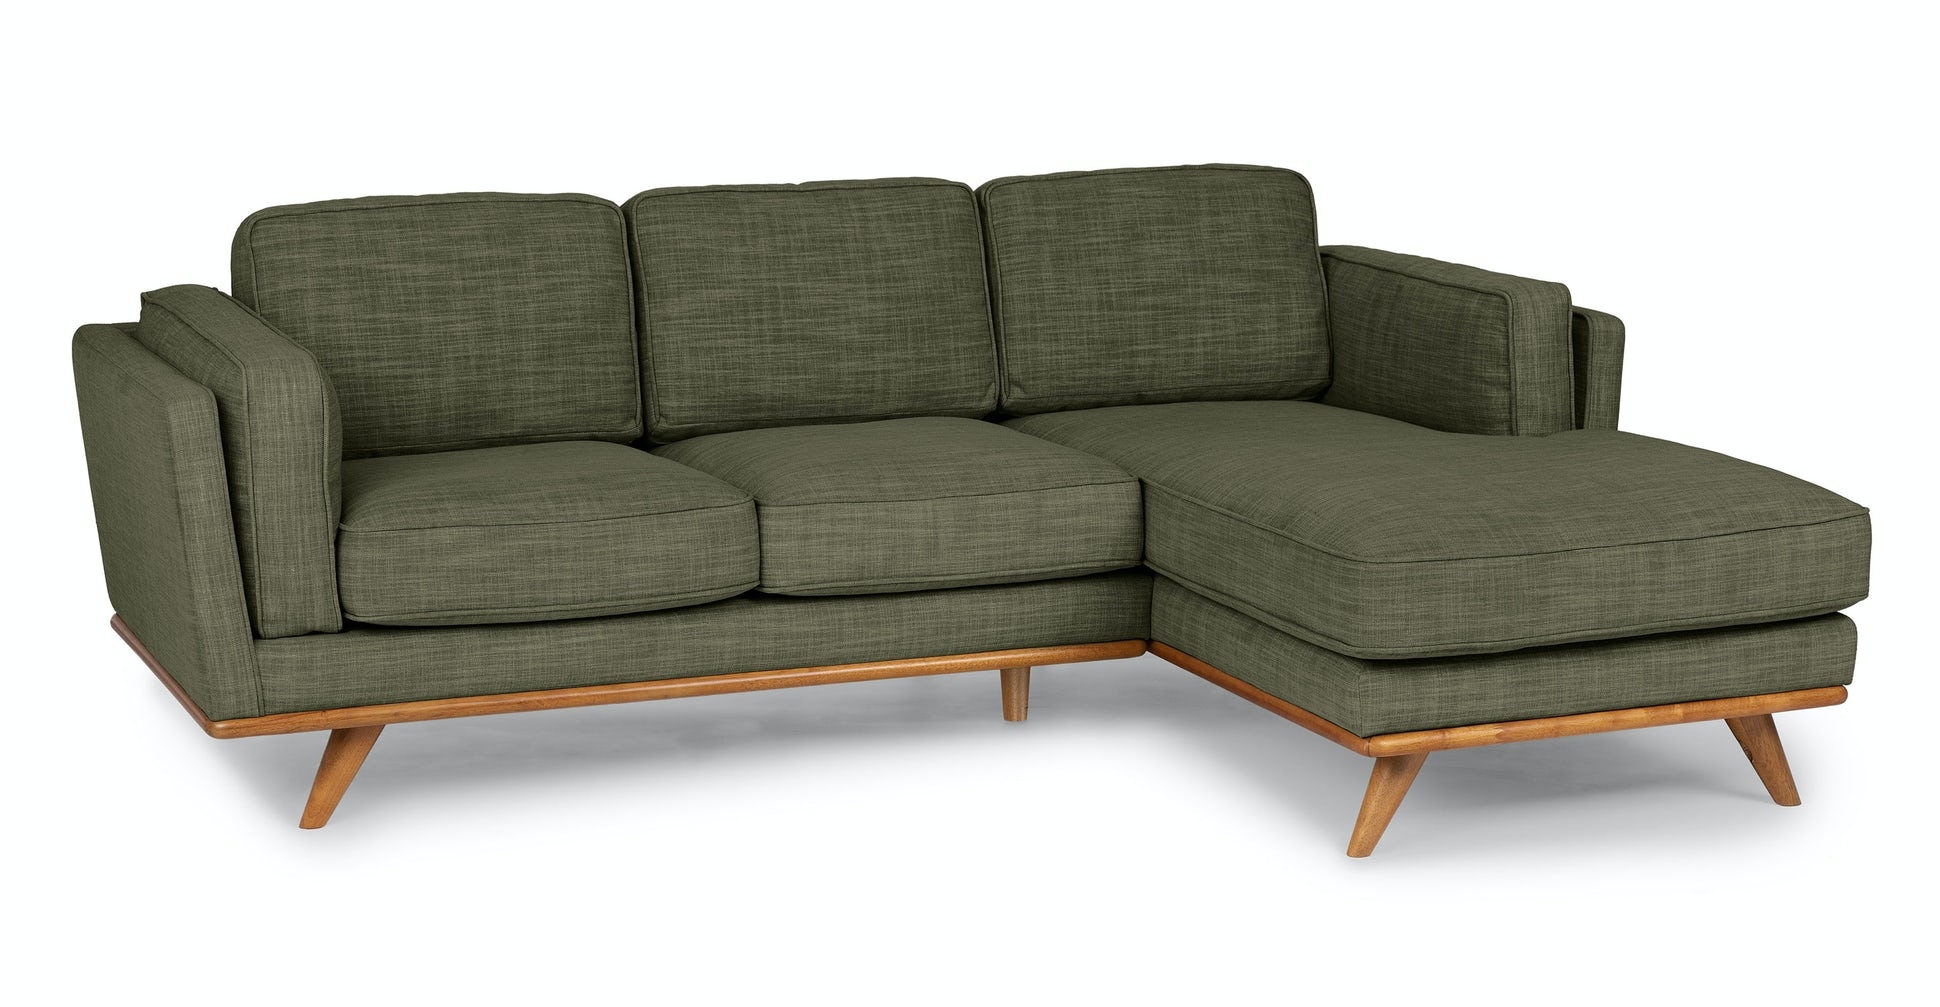 Timber Olio Green Right Sectional - Image 1